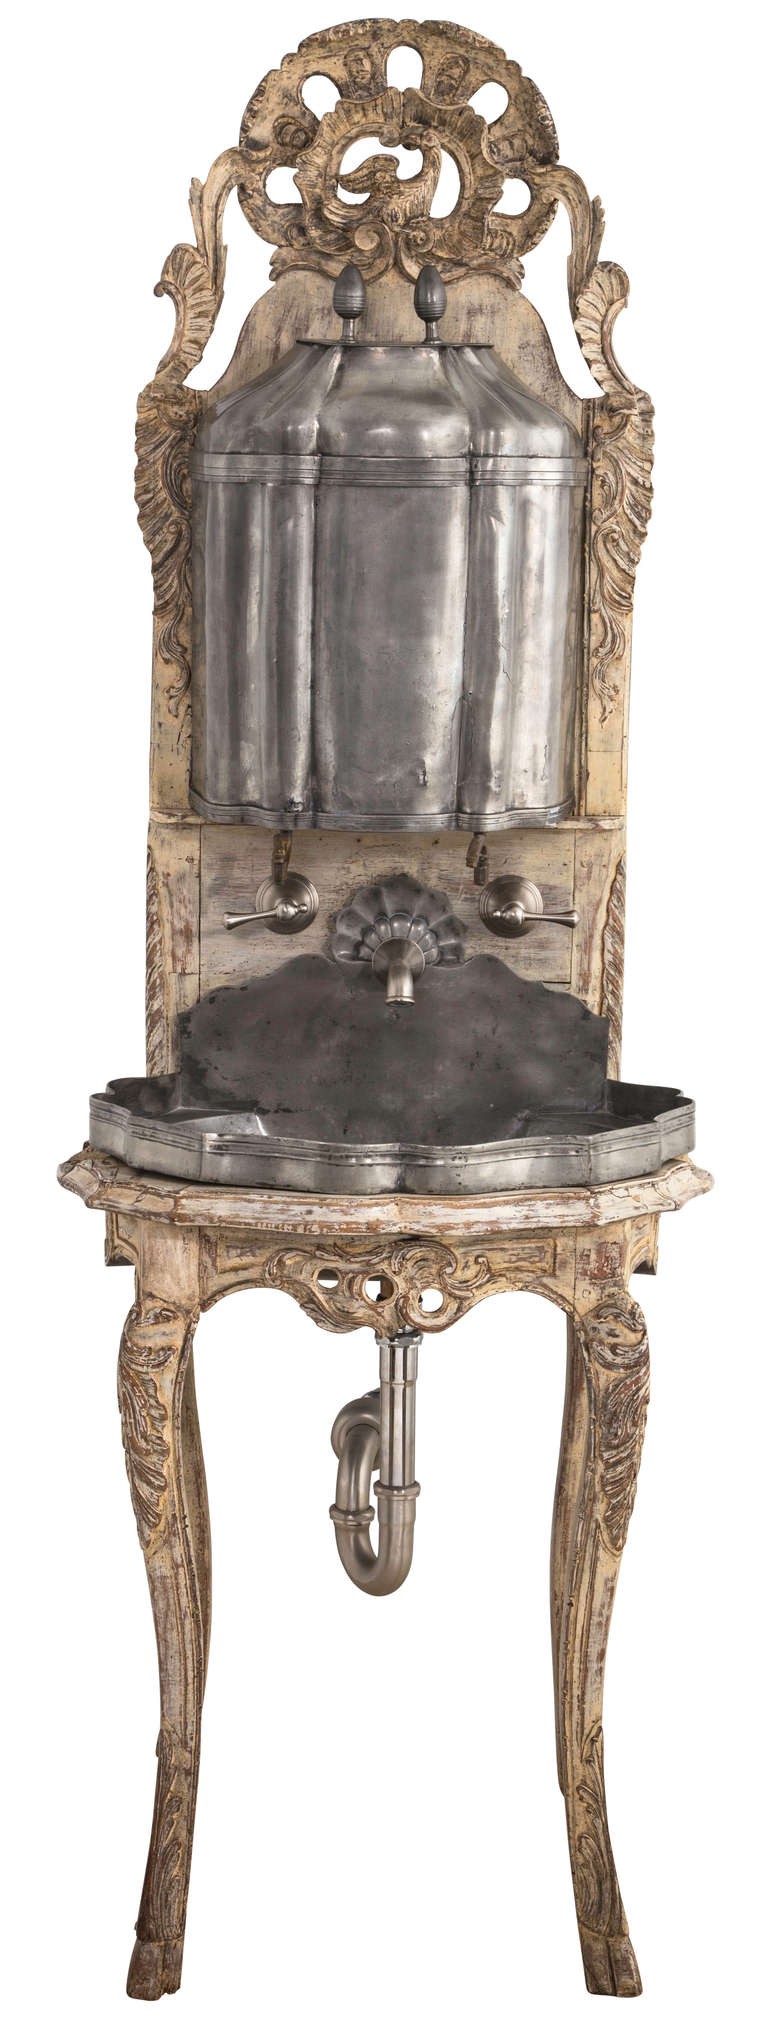 C. 1860s very rare French Pewter Lavabo.  Retrofitted to be used as a sink.  Wonderfully French, original pewter basin and tank, framed In beautifully carved oak wood stand.  Finished in white wash. One of a kind!